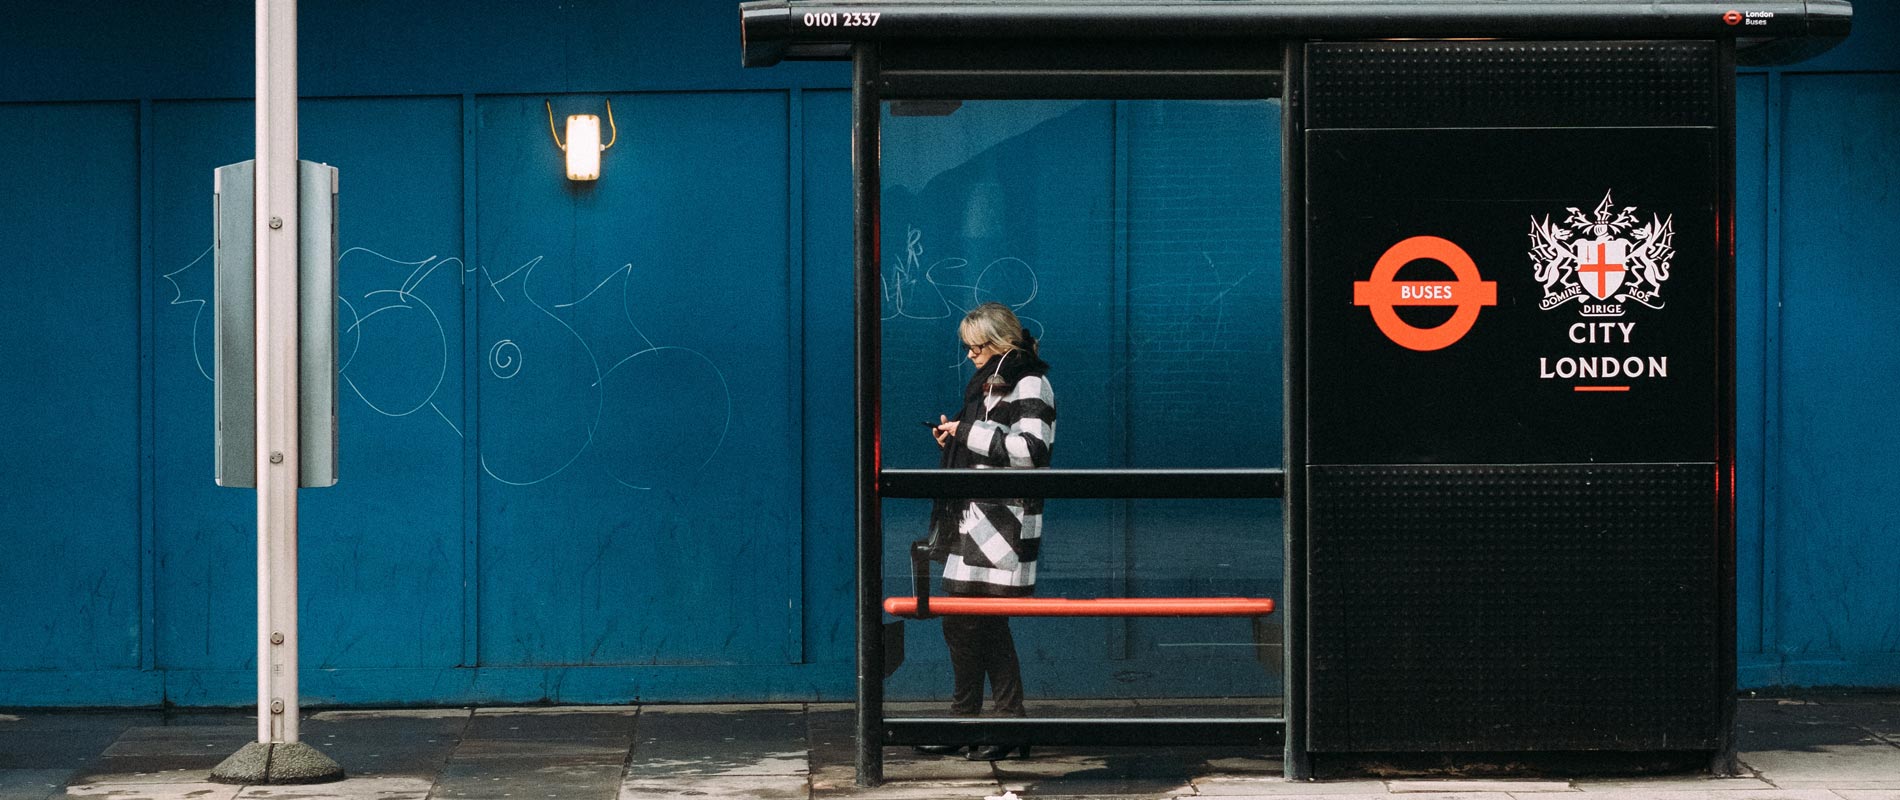 lady waiting at a bus stop in London